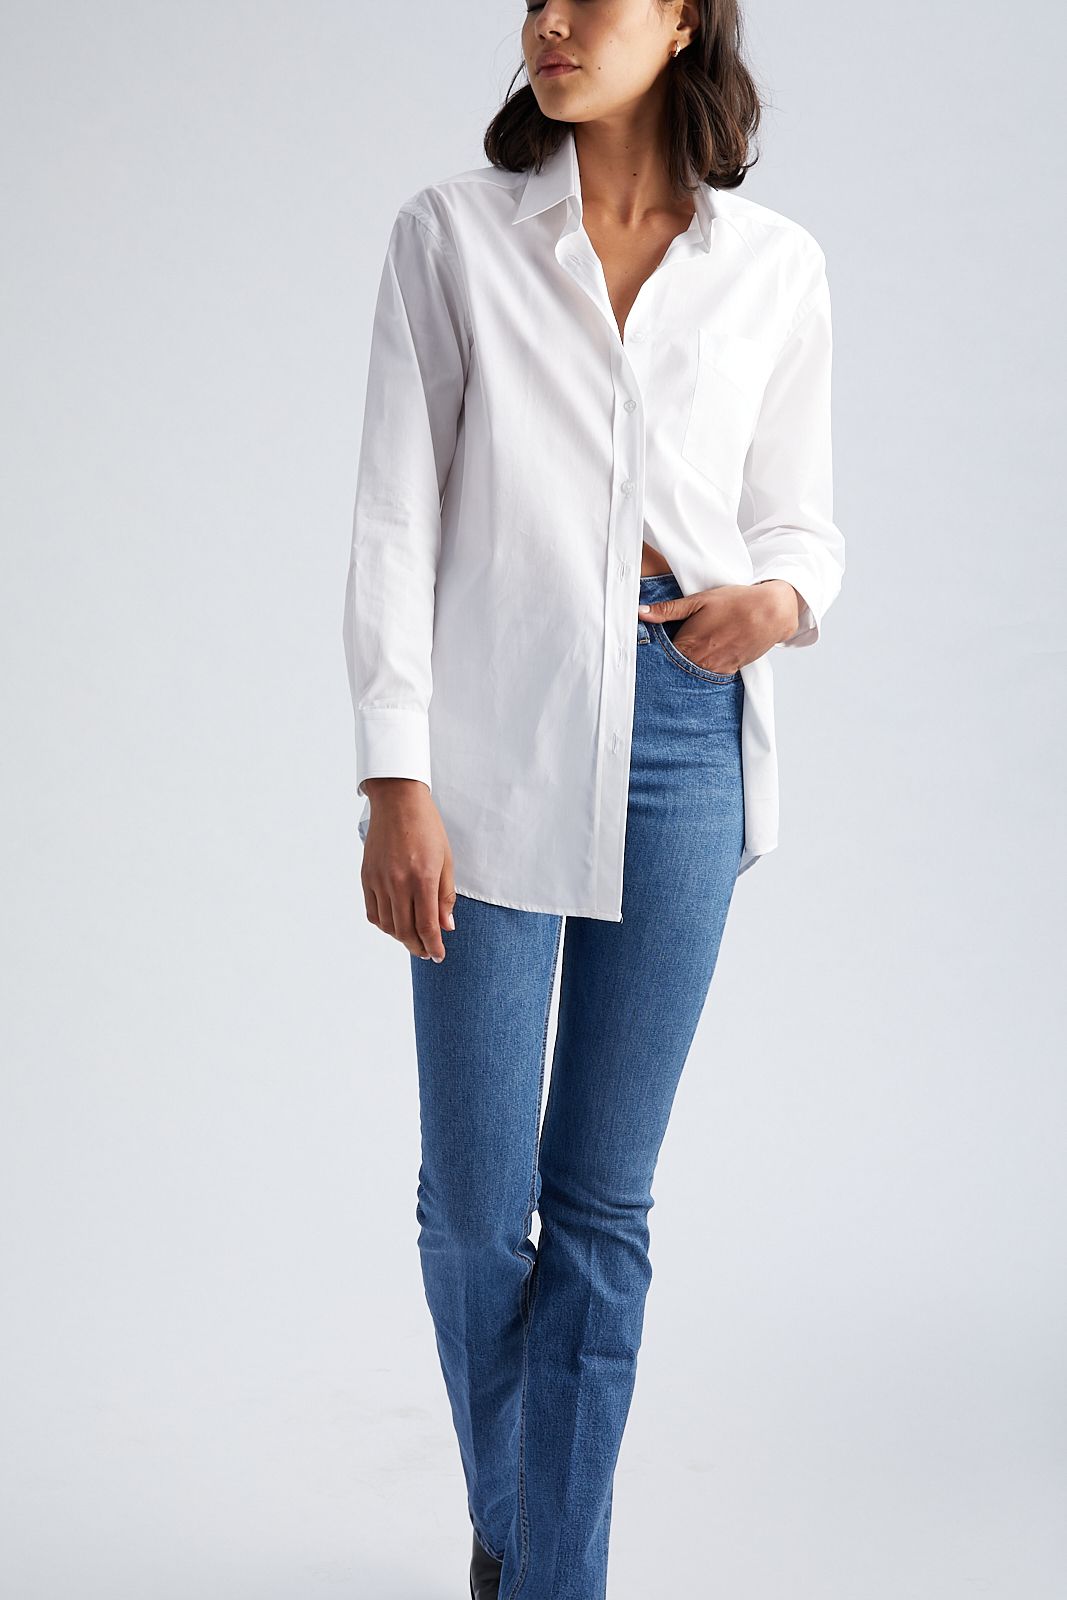 White Slim Fit Button Down With Pocket